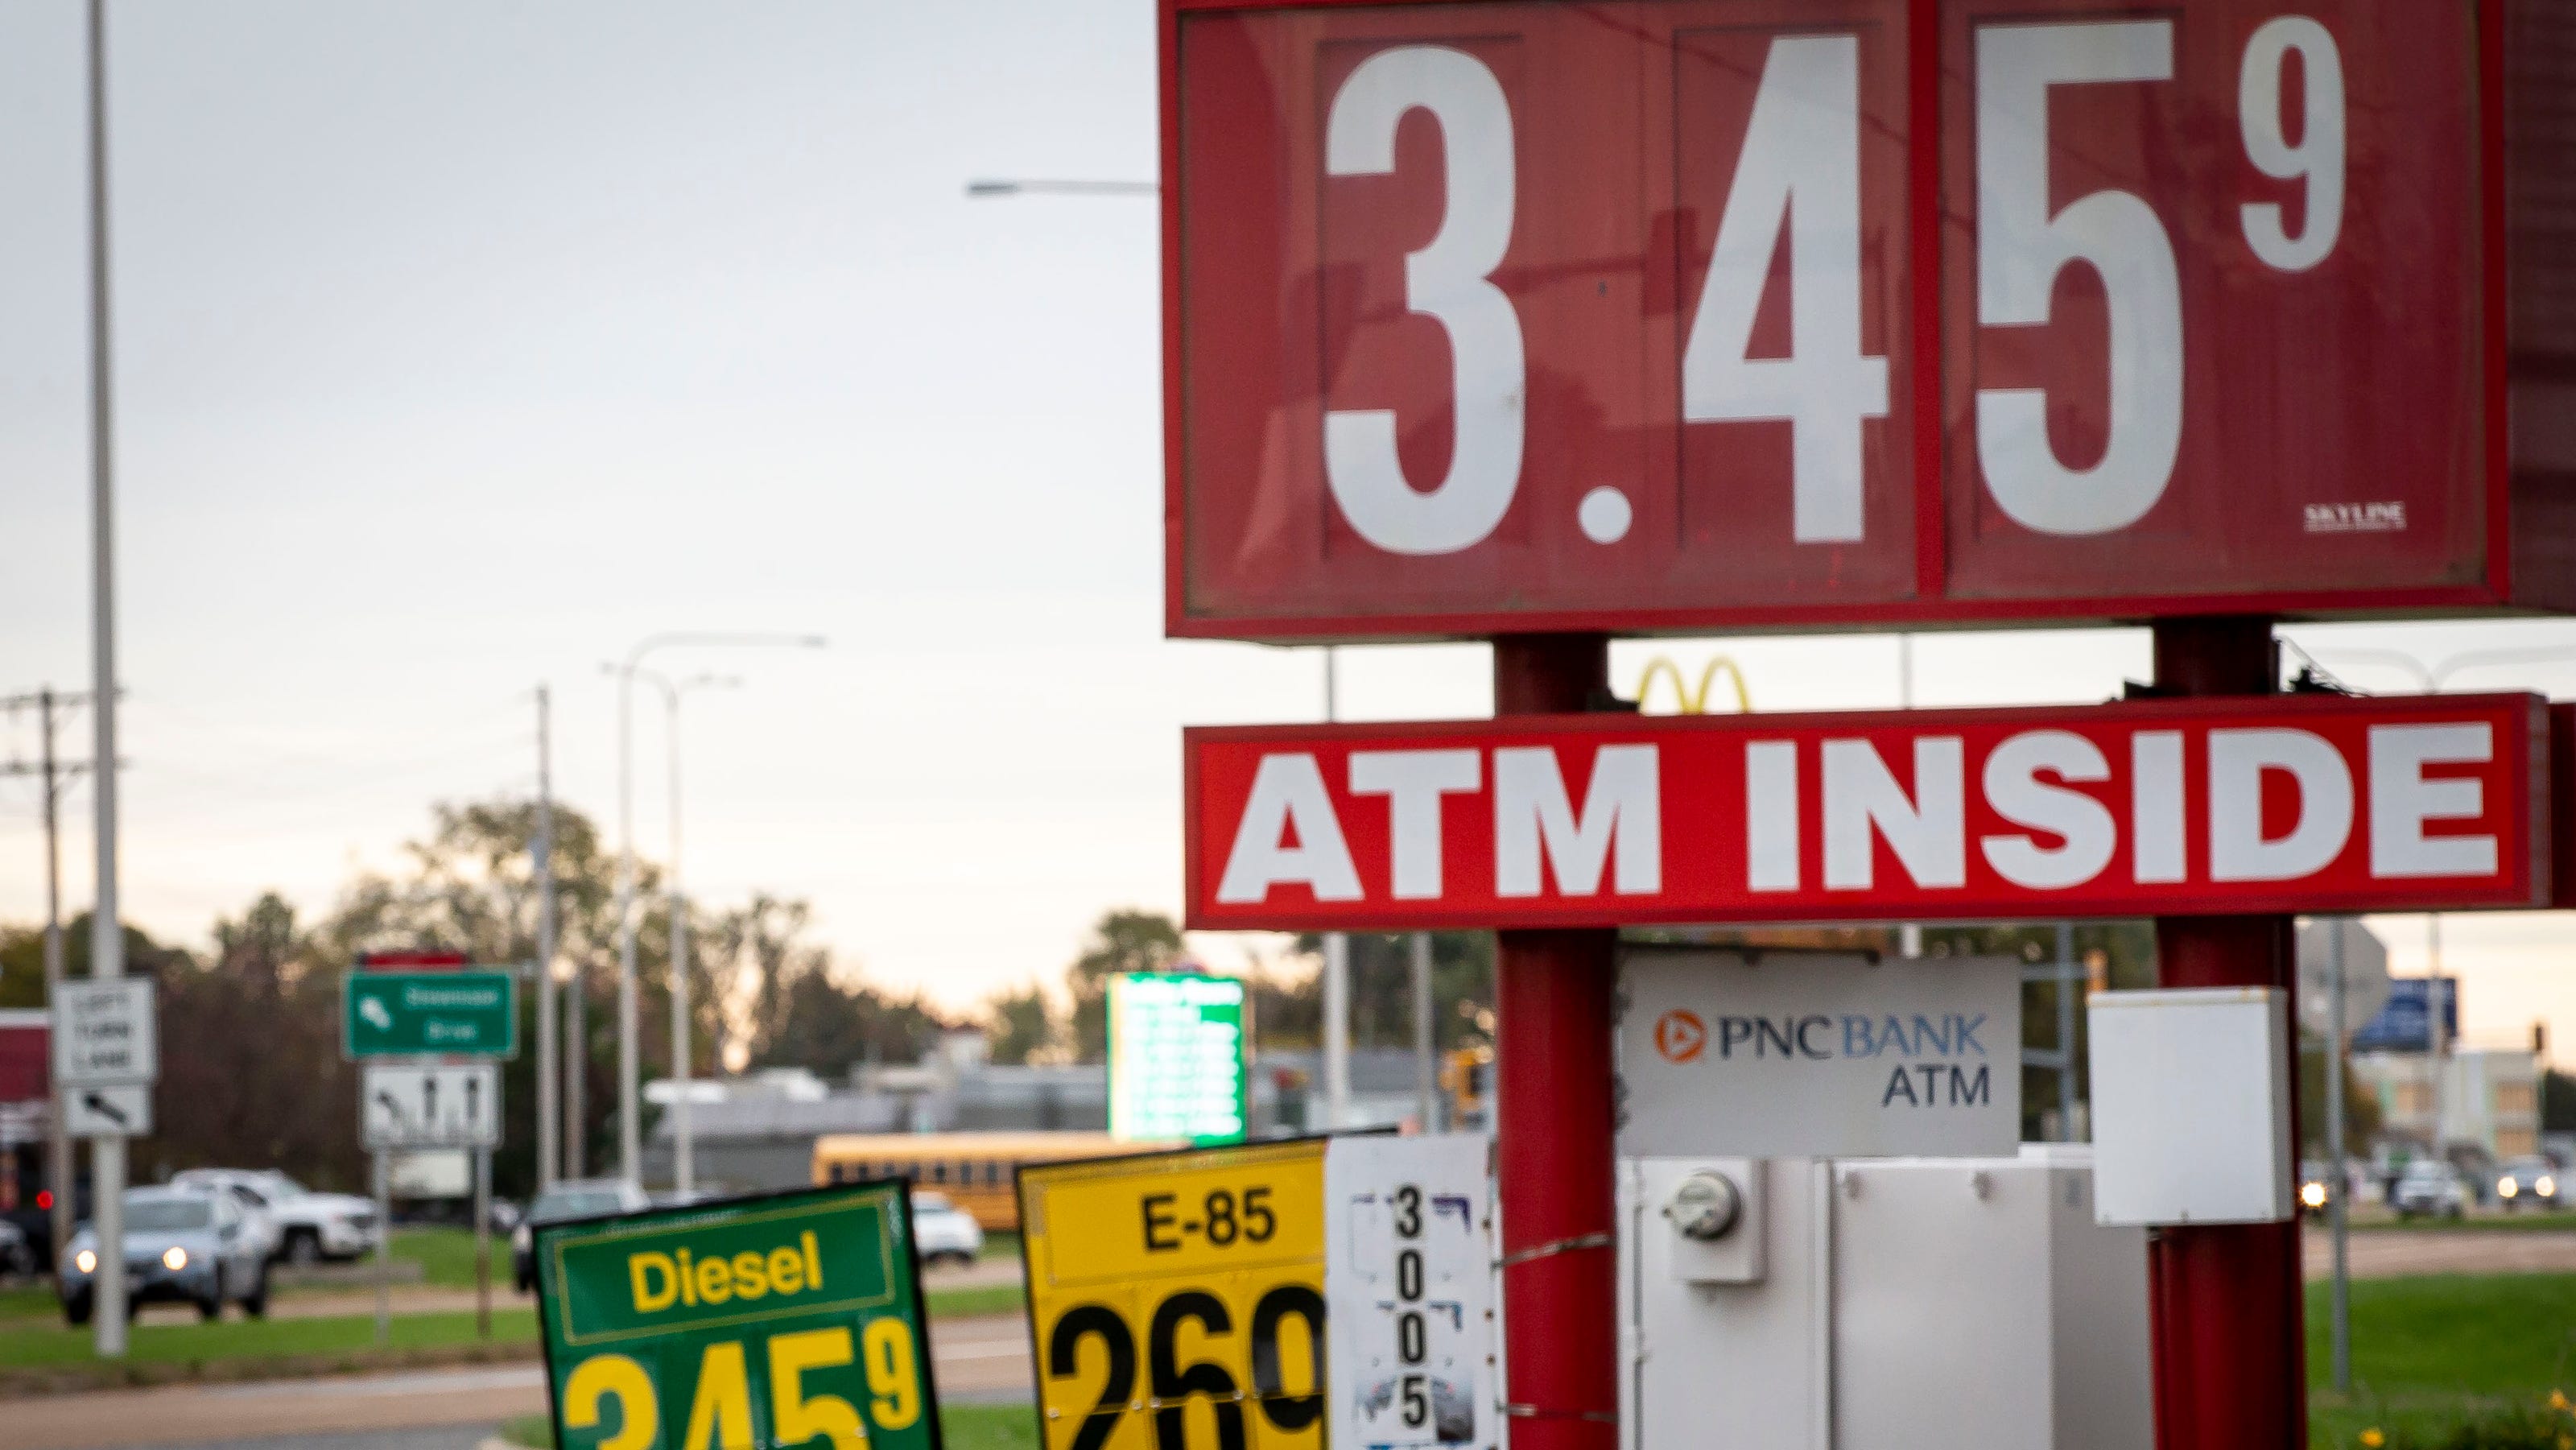 illinois-gas-prices-fuel-tax-burden-in-state-among-highest-in-country